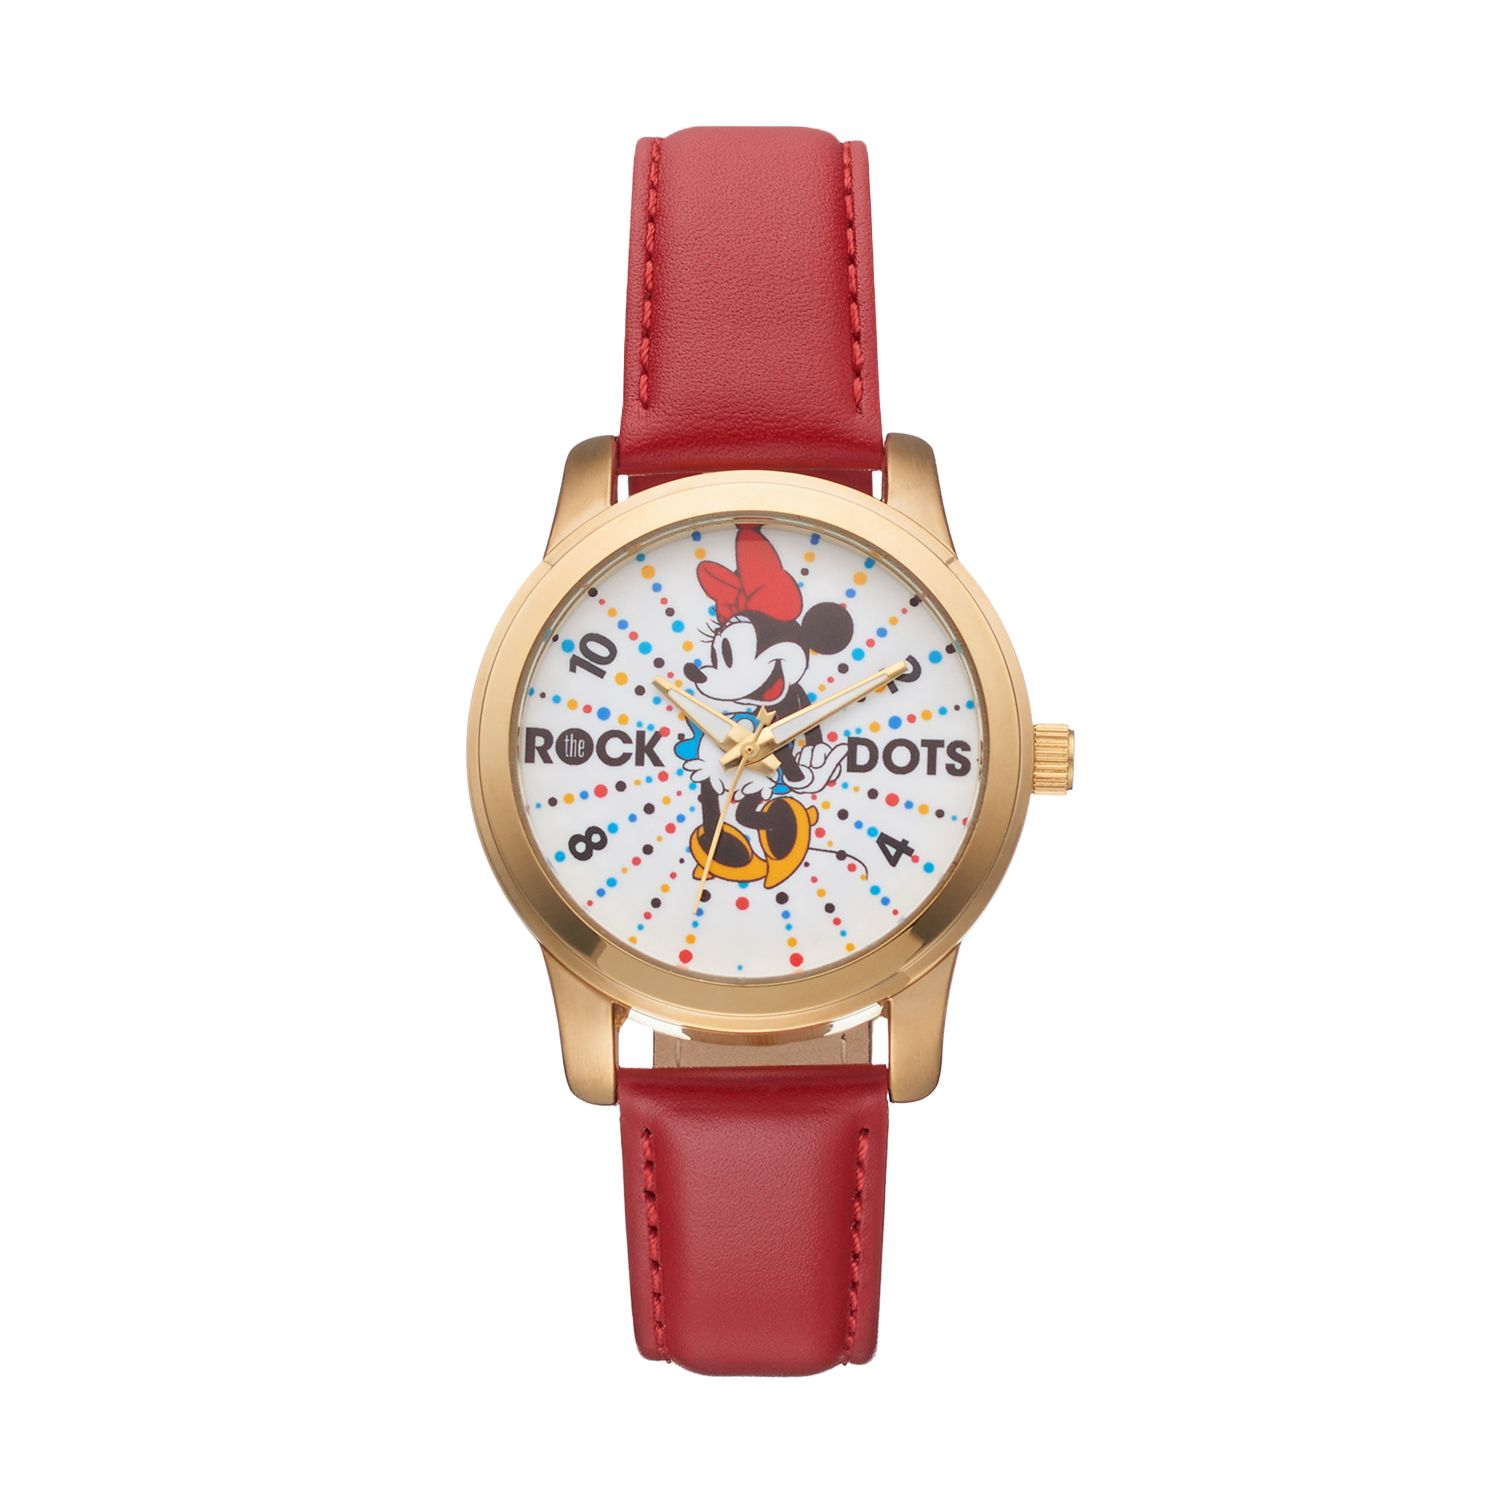 Image for Disney 's Minnie Mouse "Rock the Dots" Women's Leather Watch at Kohl's.